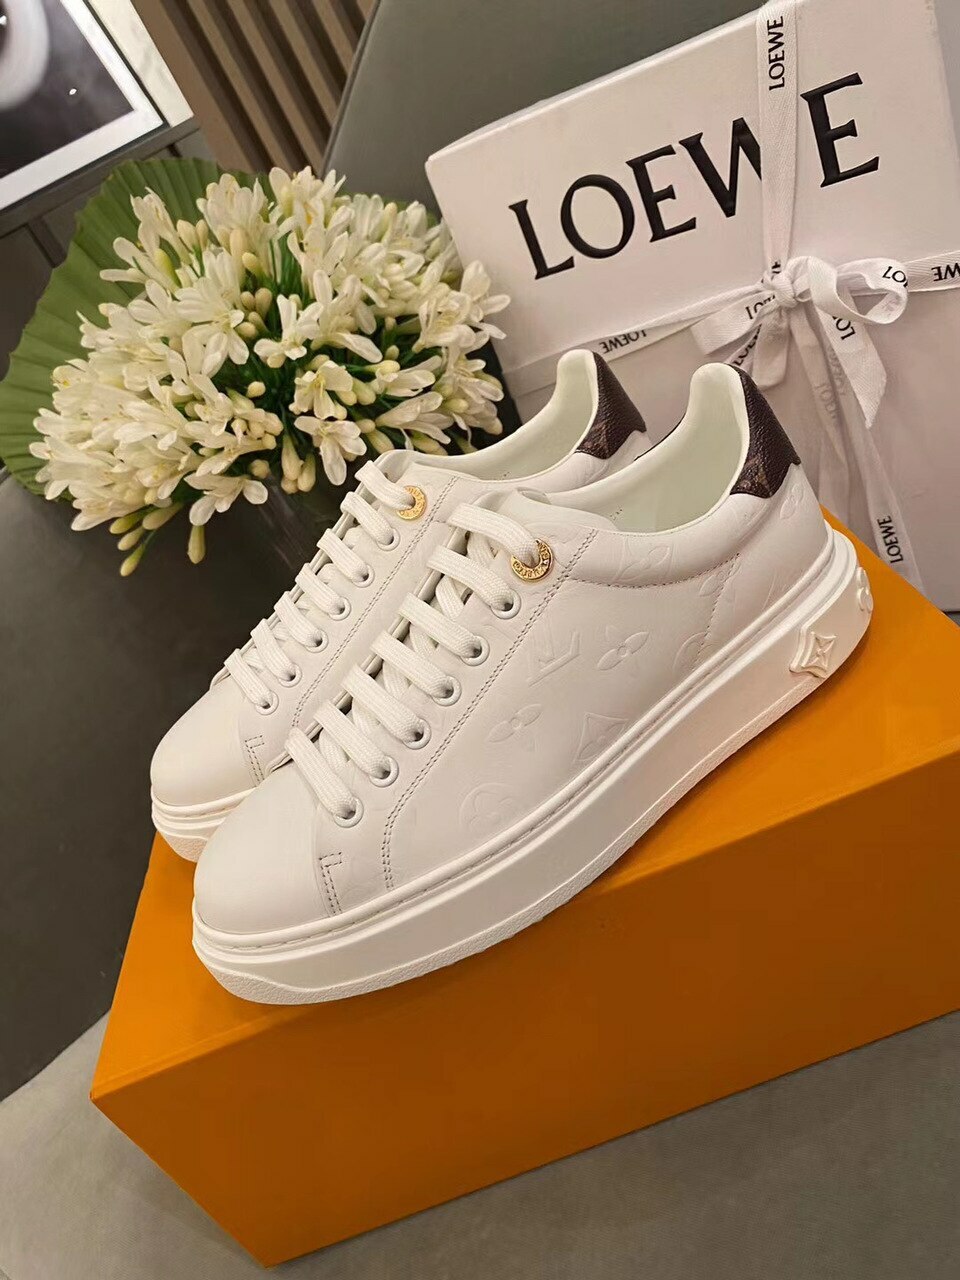 it can equation spiral Louis Vuitton Time Out Sneakers Calfskin Leather Spring/Summer Collection  1A7UM6 White Women Shoes - Acuia Store - Dom Perignon x Louis Vuitton  Vachetta Leather Bottle Holder - Acuia Store